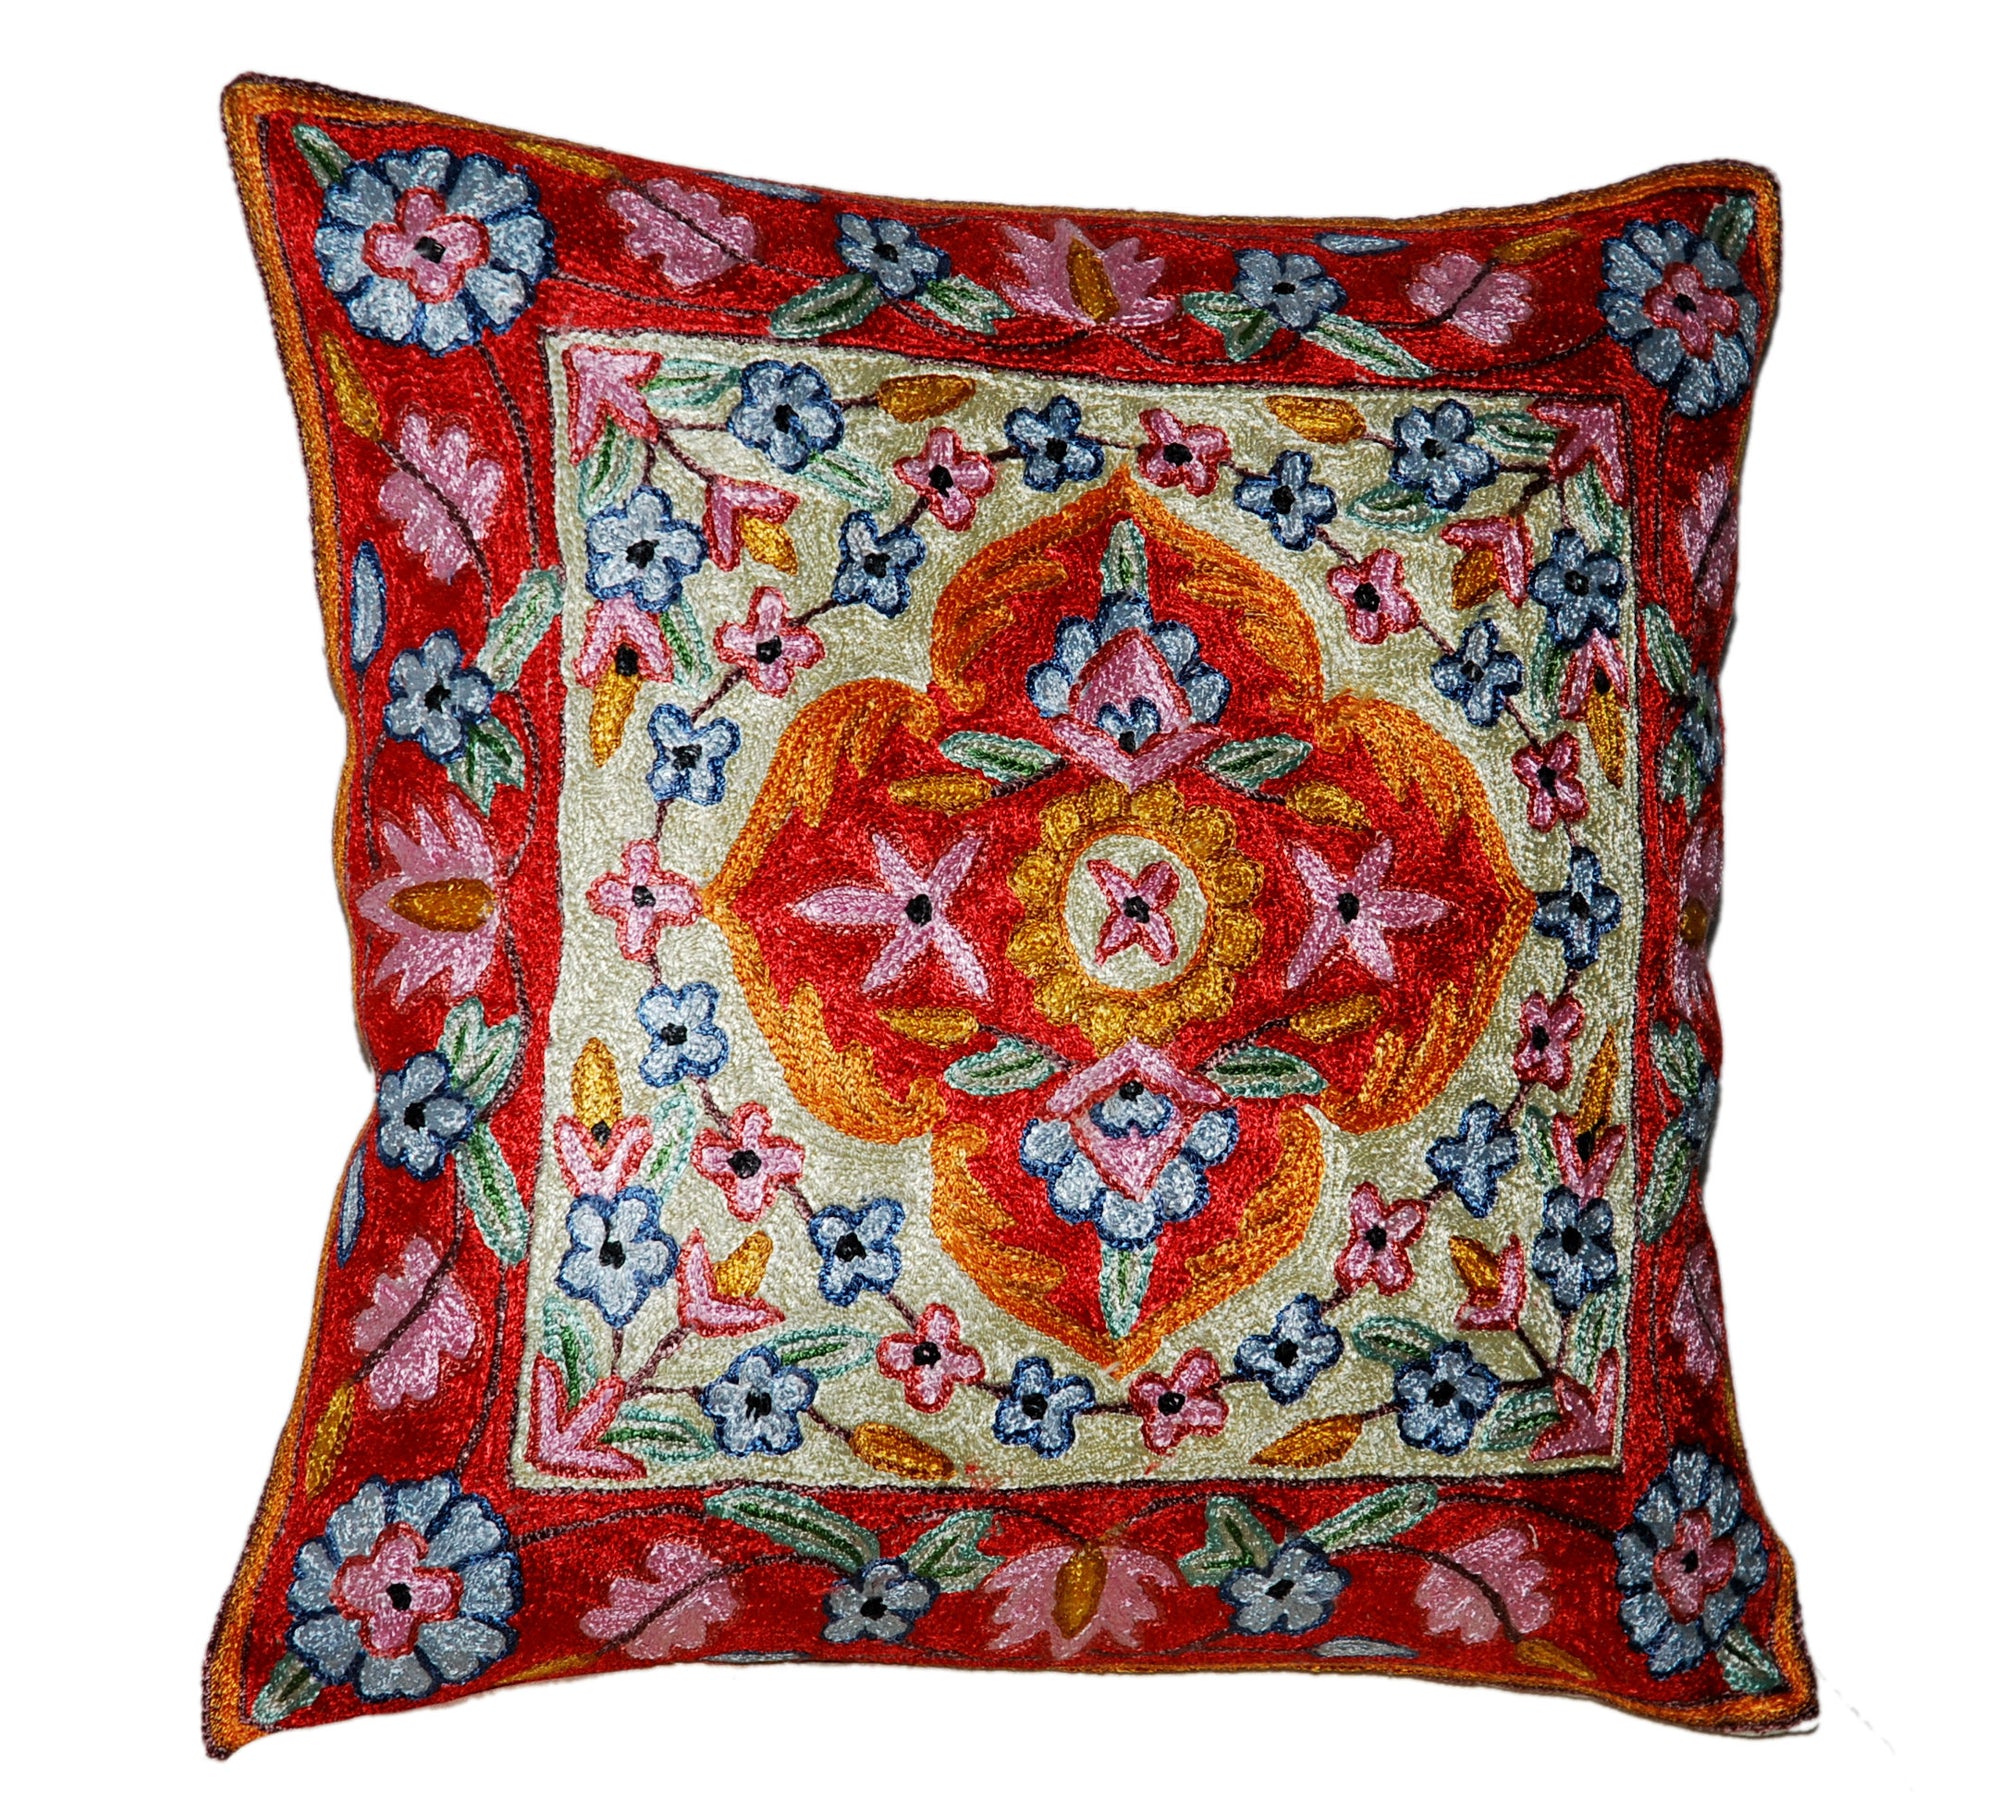 Crewel Silk Embroidered Cushion Throw Pillow Cover, Multicolor #CW2018